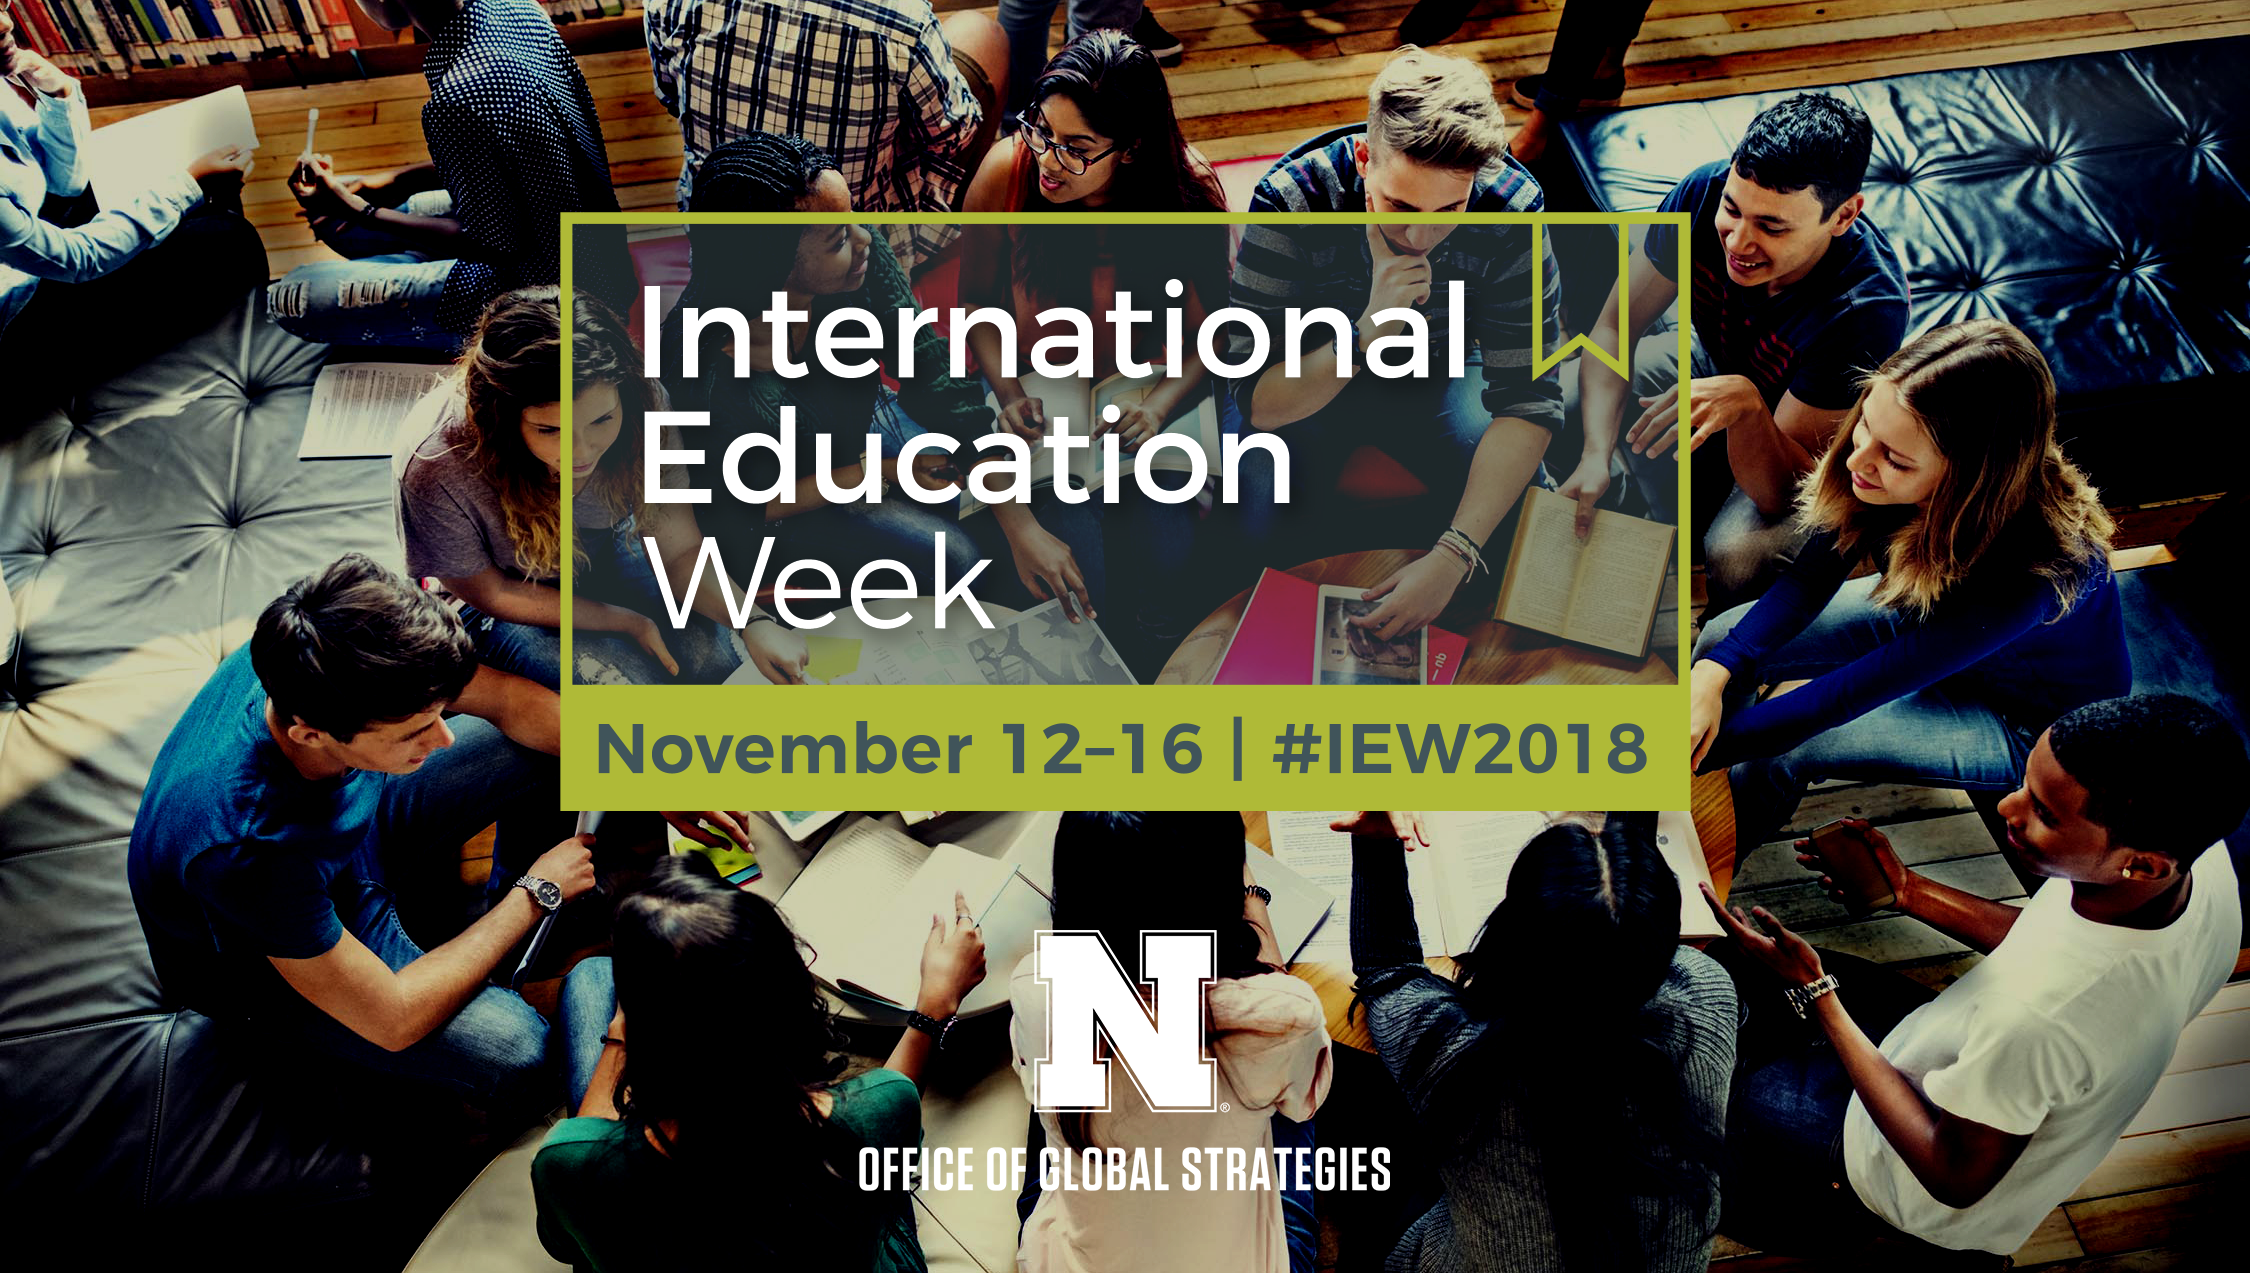 International Education Week (IEW) is a joint initiative of the U.S. Departments of State and Education to celebrate the benefits of international education and prepare Americans for a global environment during the week of November 12 – 16.